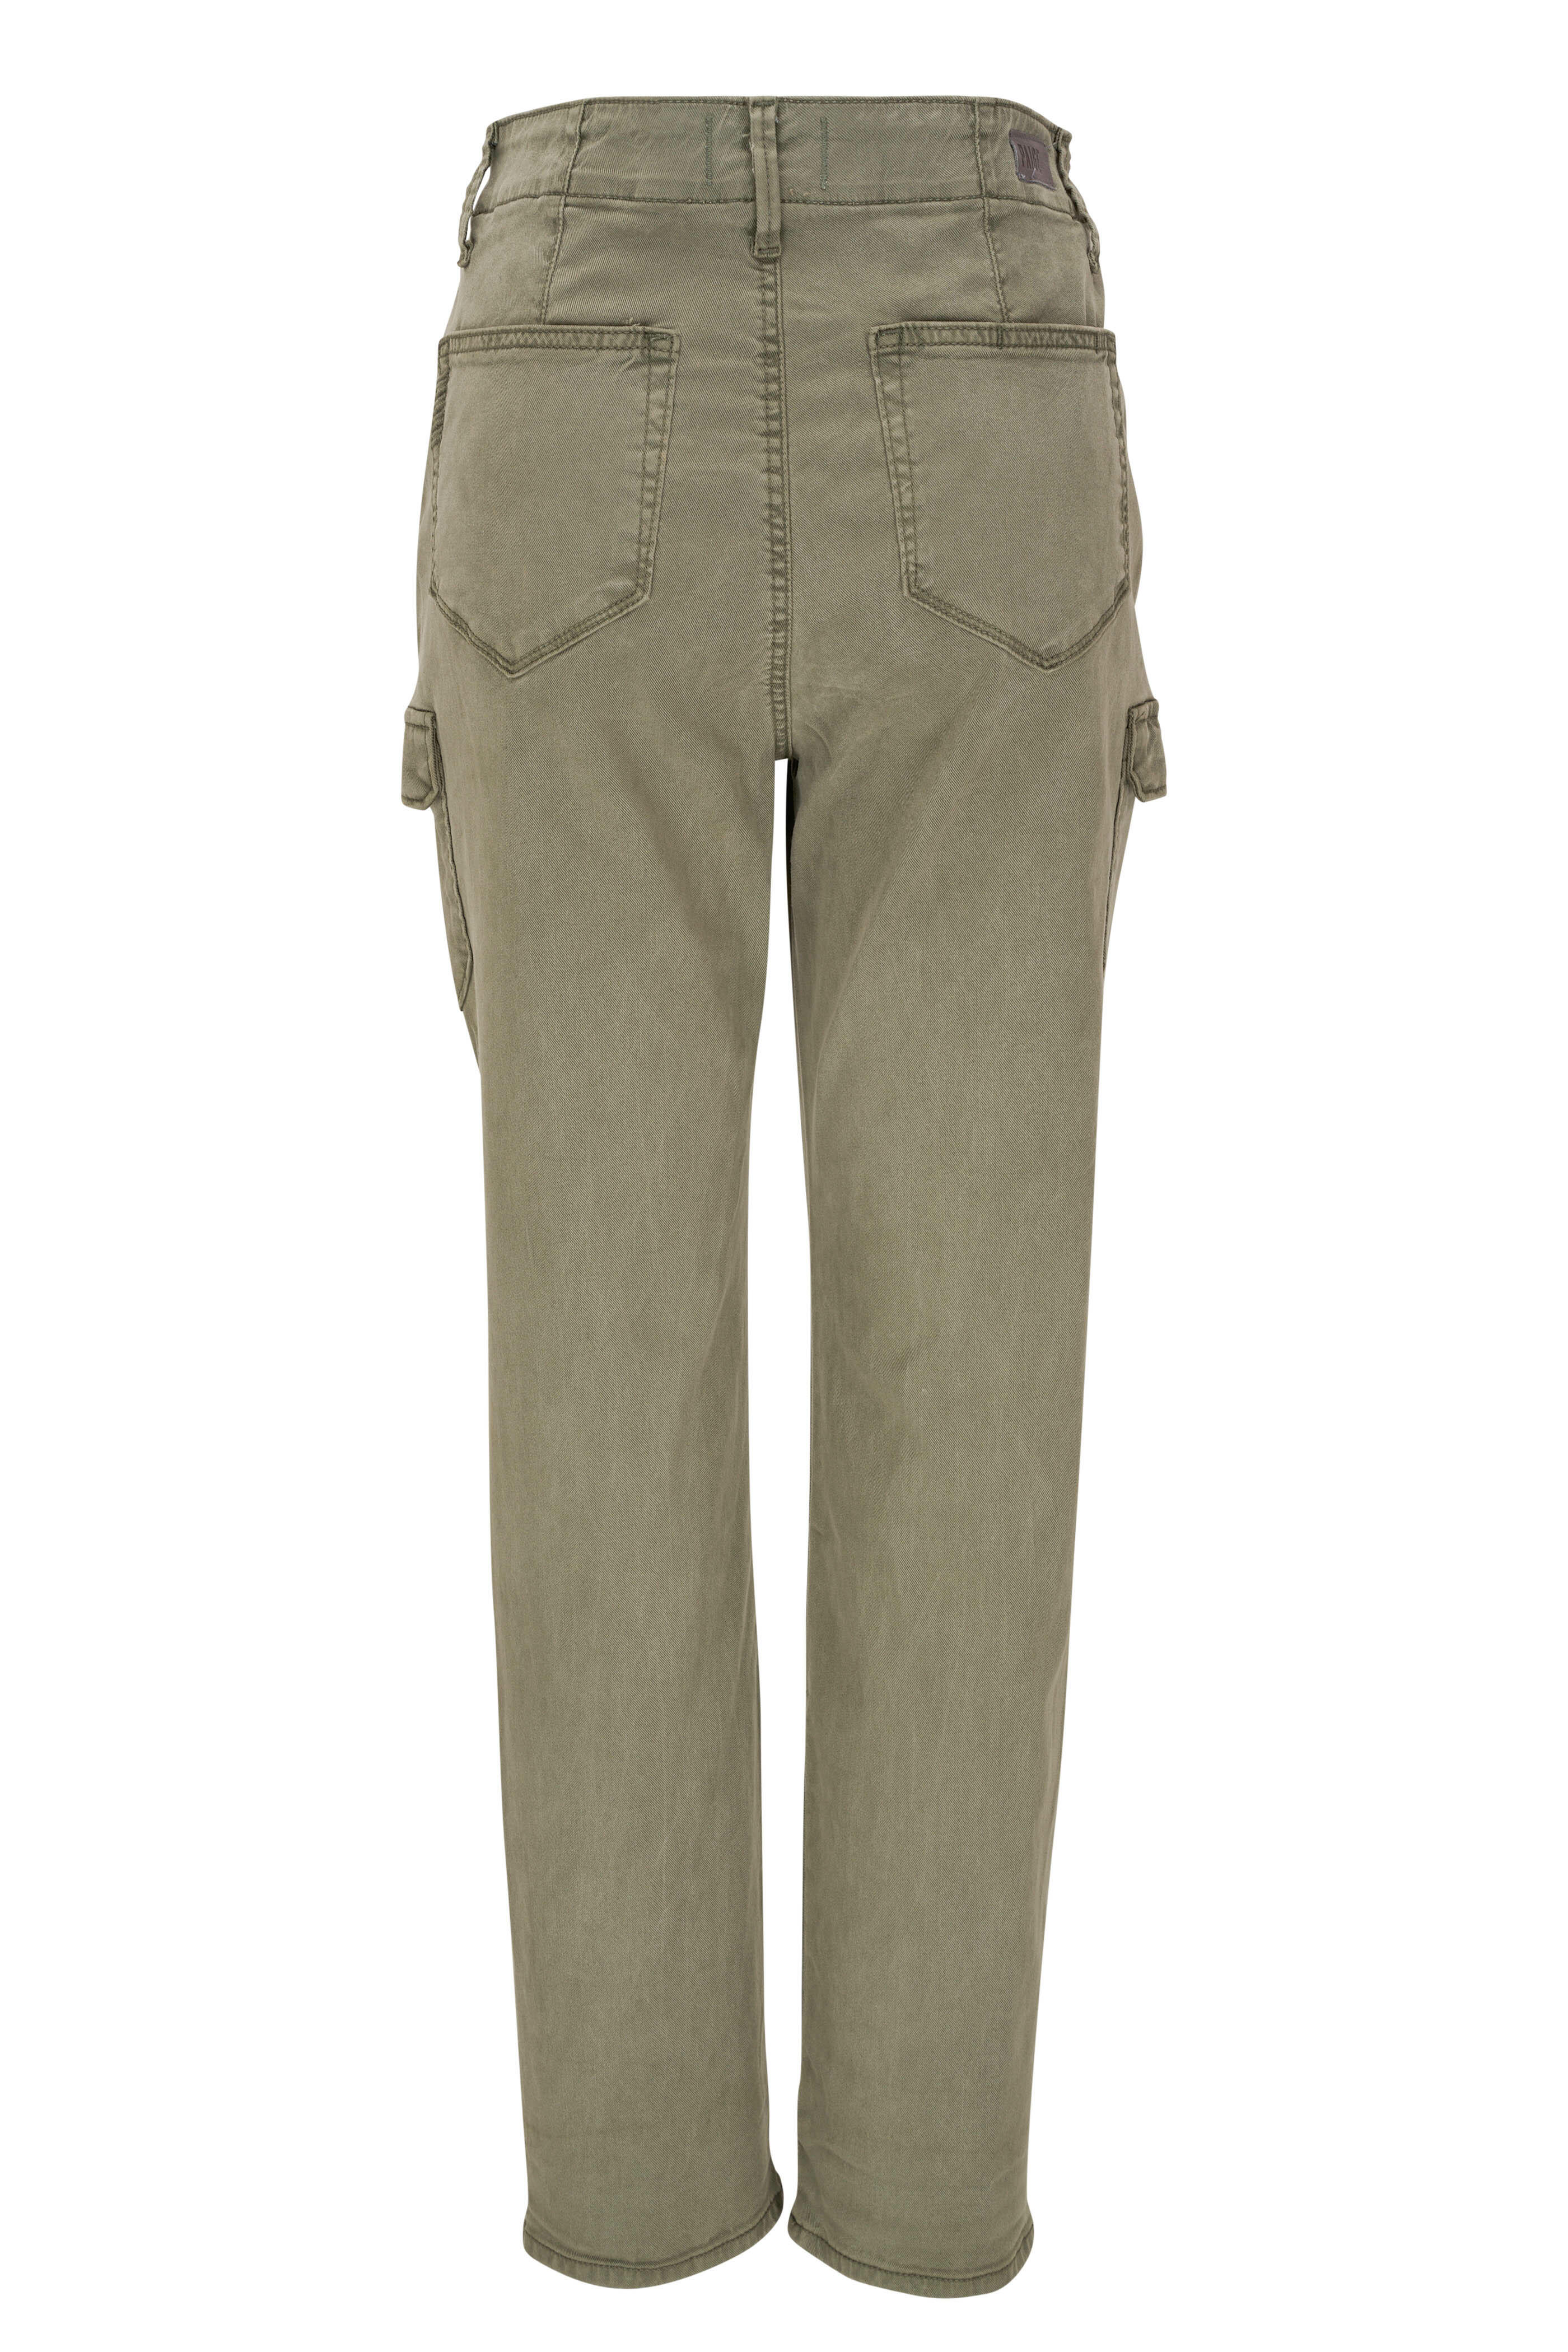 Paige - Drew Vintage Ivy Green Cargo Pant | Mitchell Stores